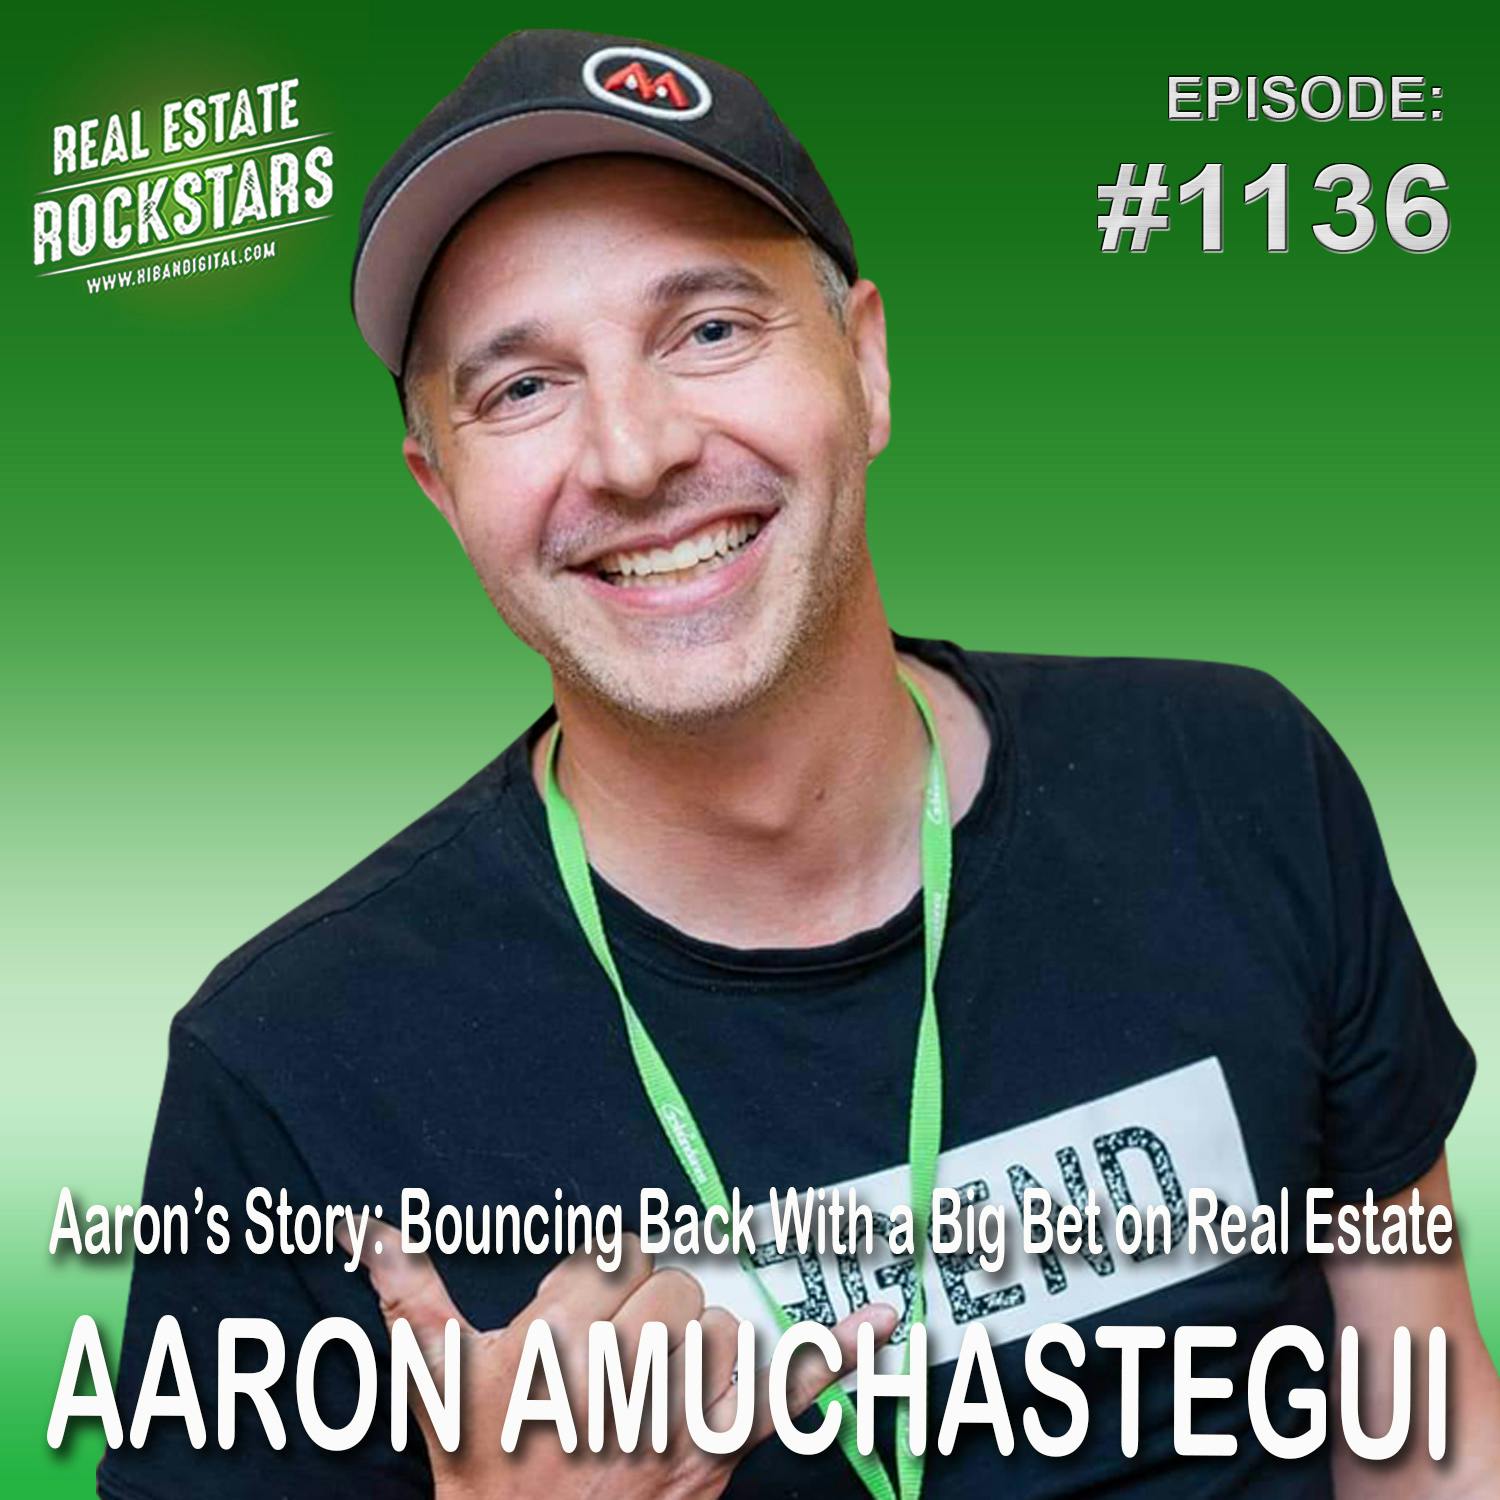 1136: Aaron’s Story: Bouncing Back With a Big Bet on Real Estate